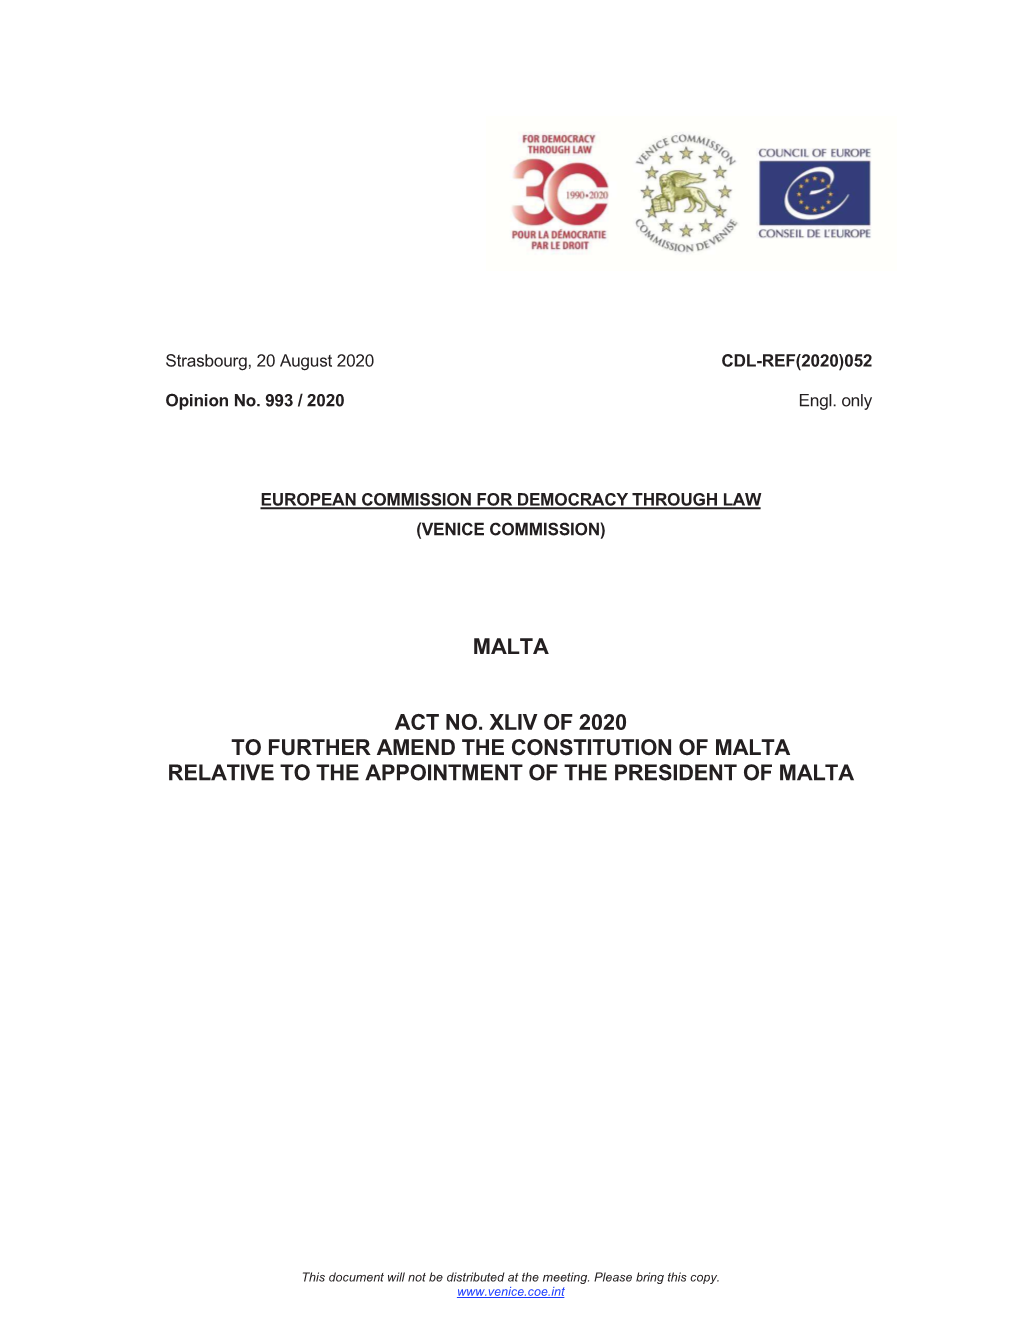 Malta Act No. Xliv of 2020 to Further Amend The